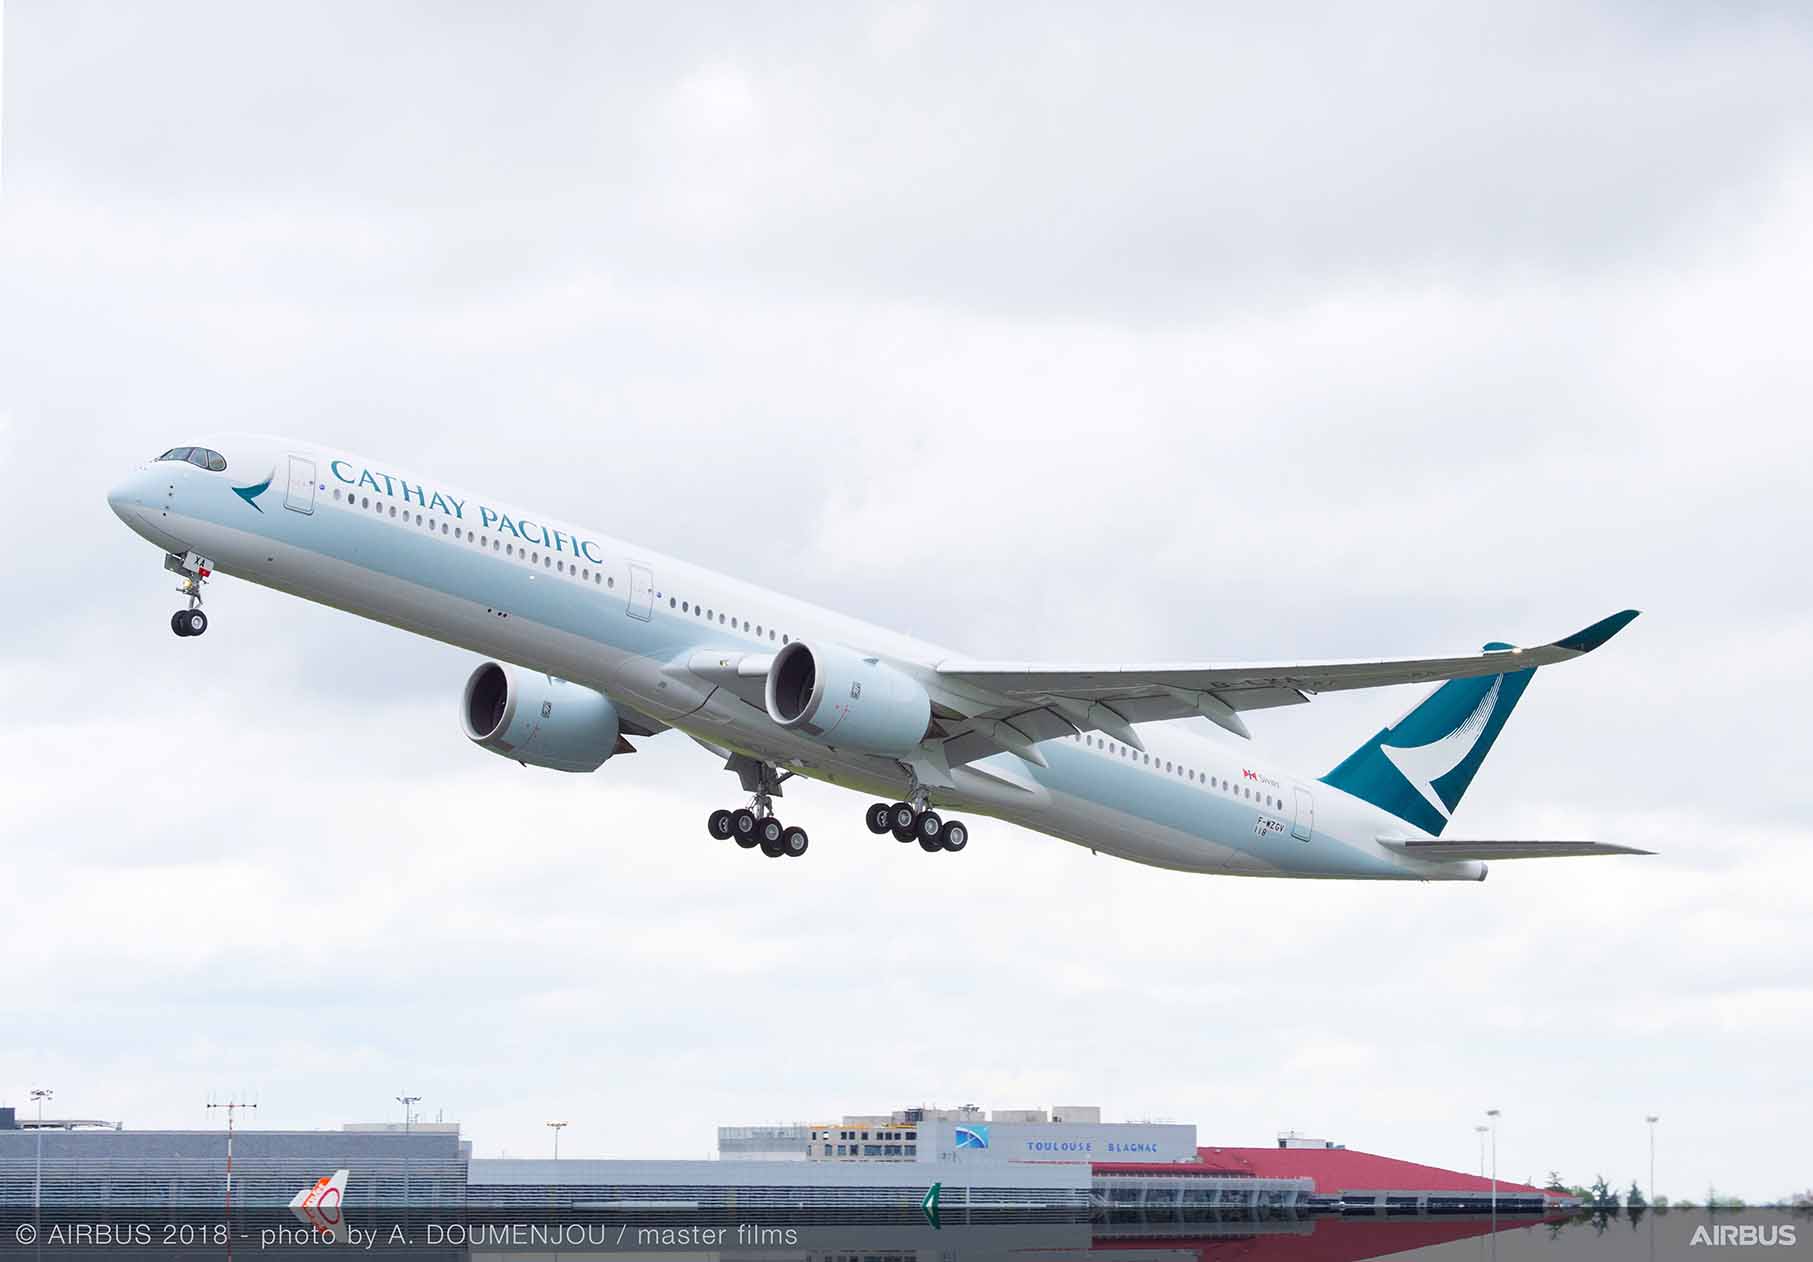 Cathay Pacific Group reaches 50% of pre-pandemic passenger flight capacity in March 2023